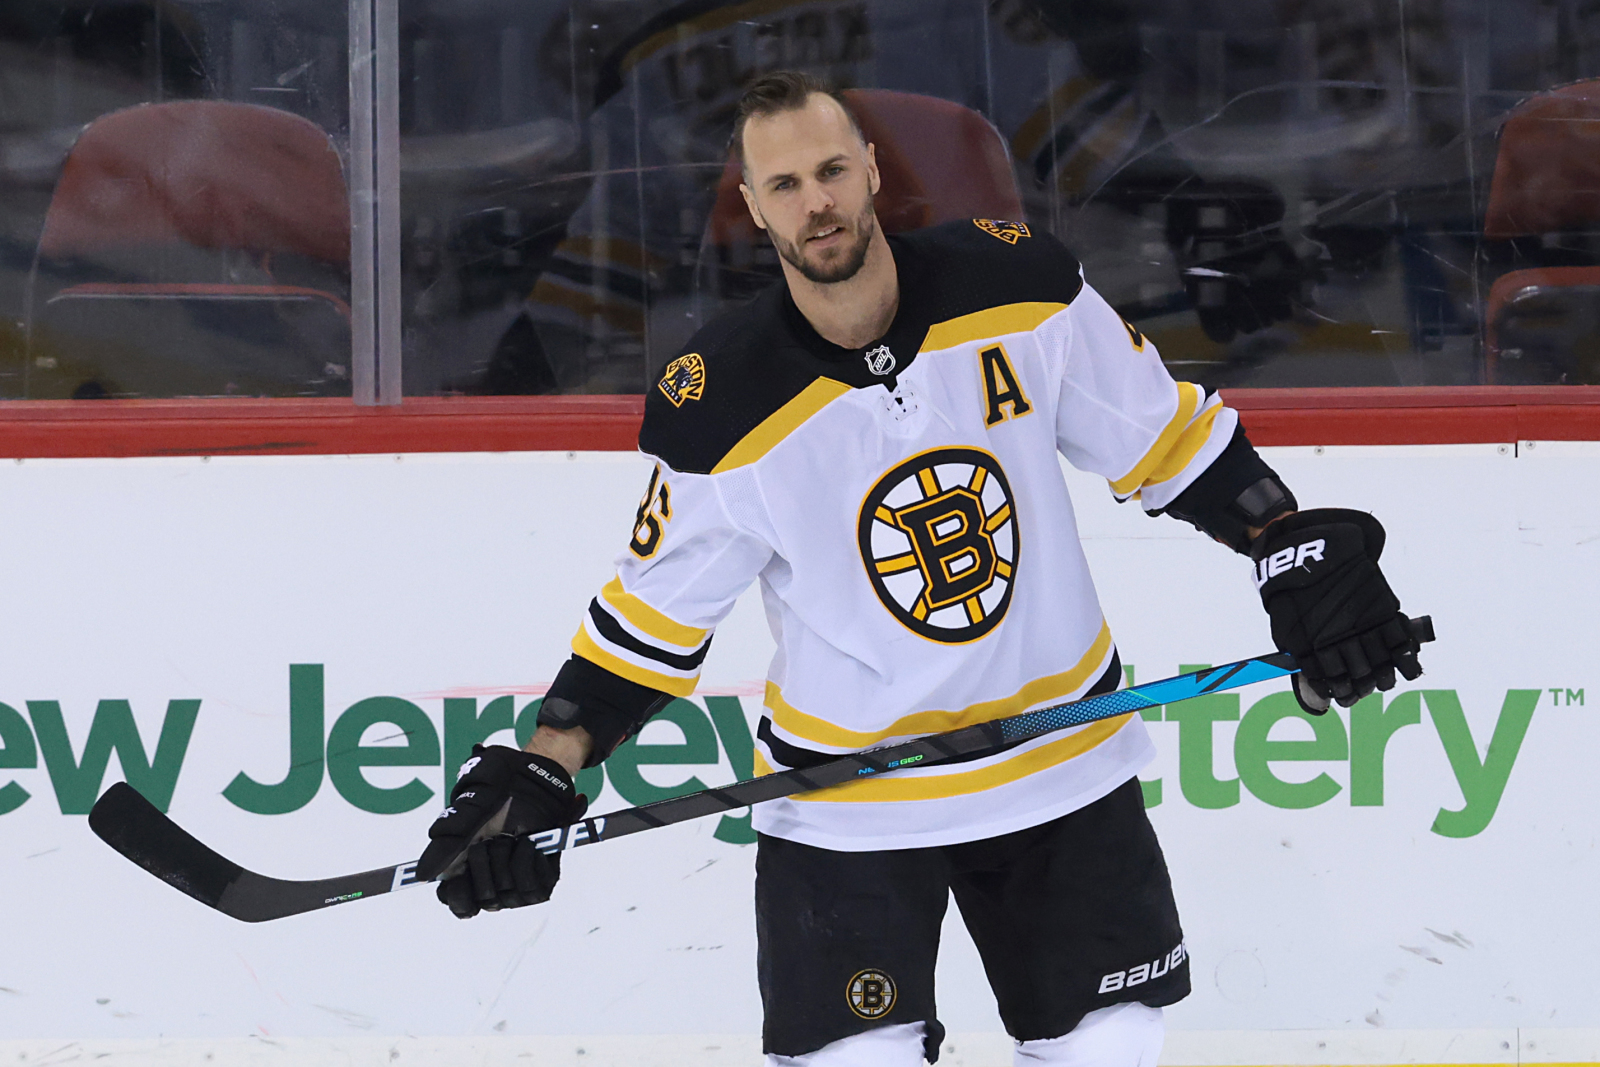 Does David Krejci Have a Future with the Boston Bruins Beyond 2014